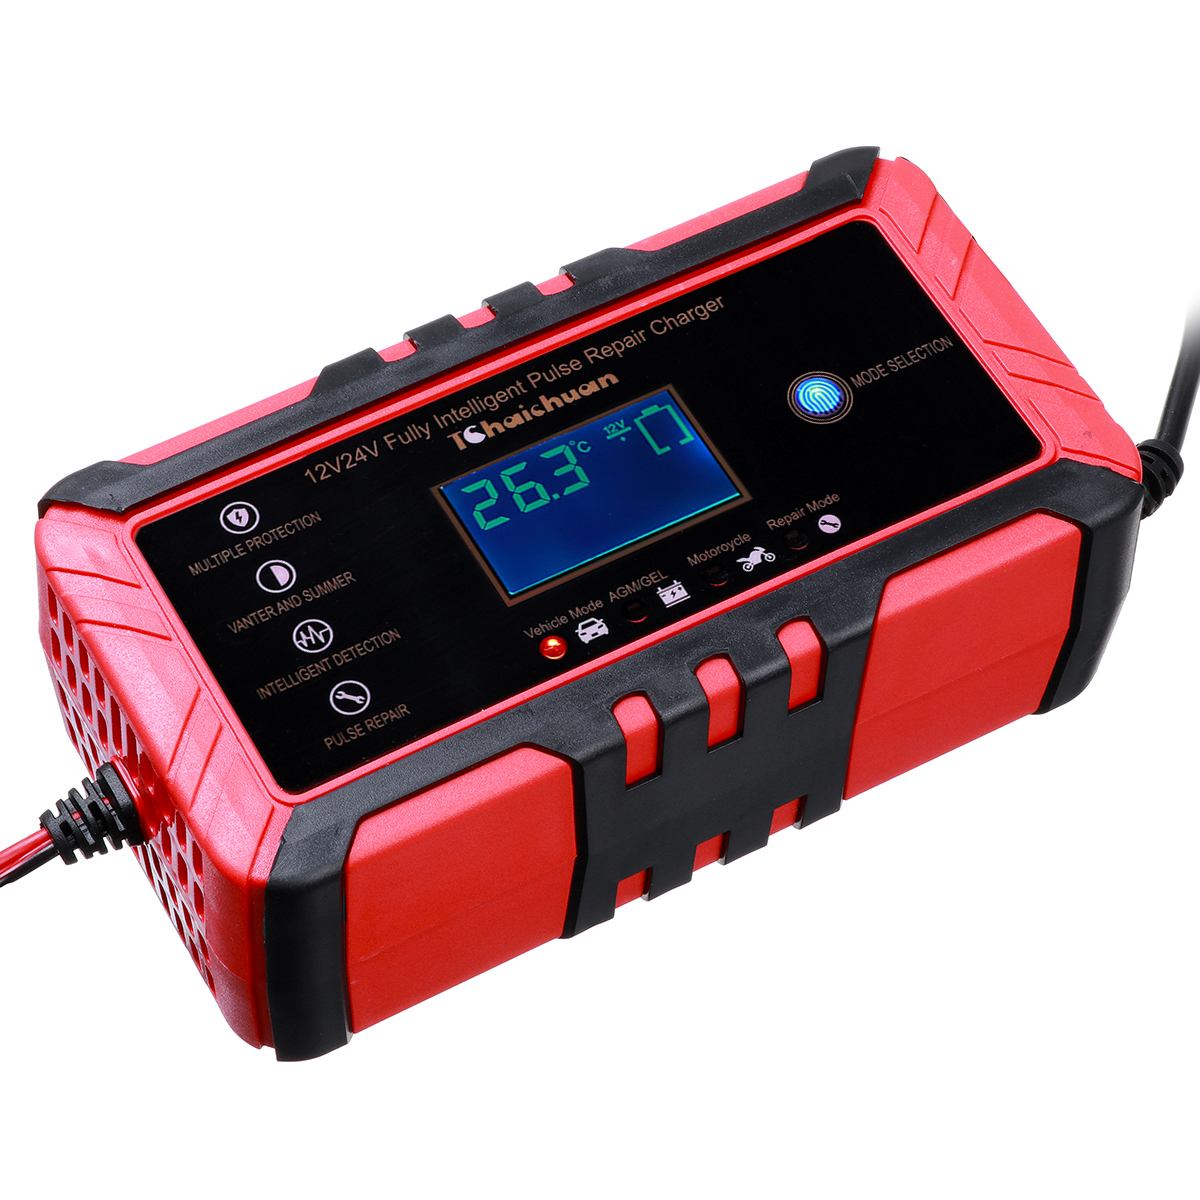 12/24V 8A/4A Touch Screen Pulse Repair LCD Battery Charger for Car Motorcycle Lead Acid Battery Agm Gel Wet